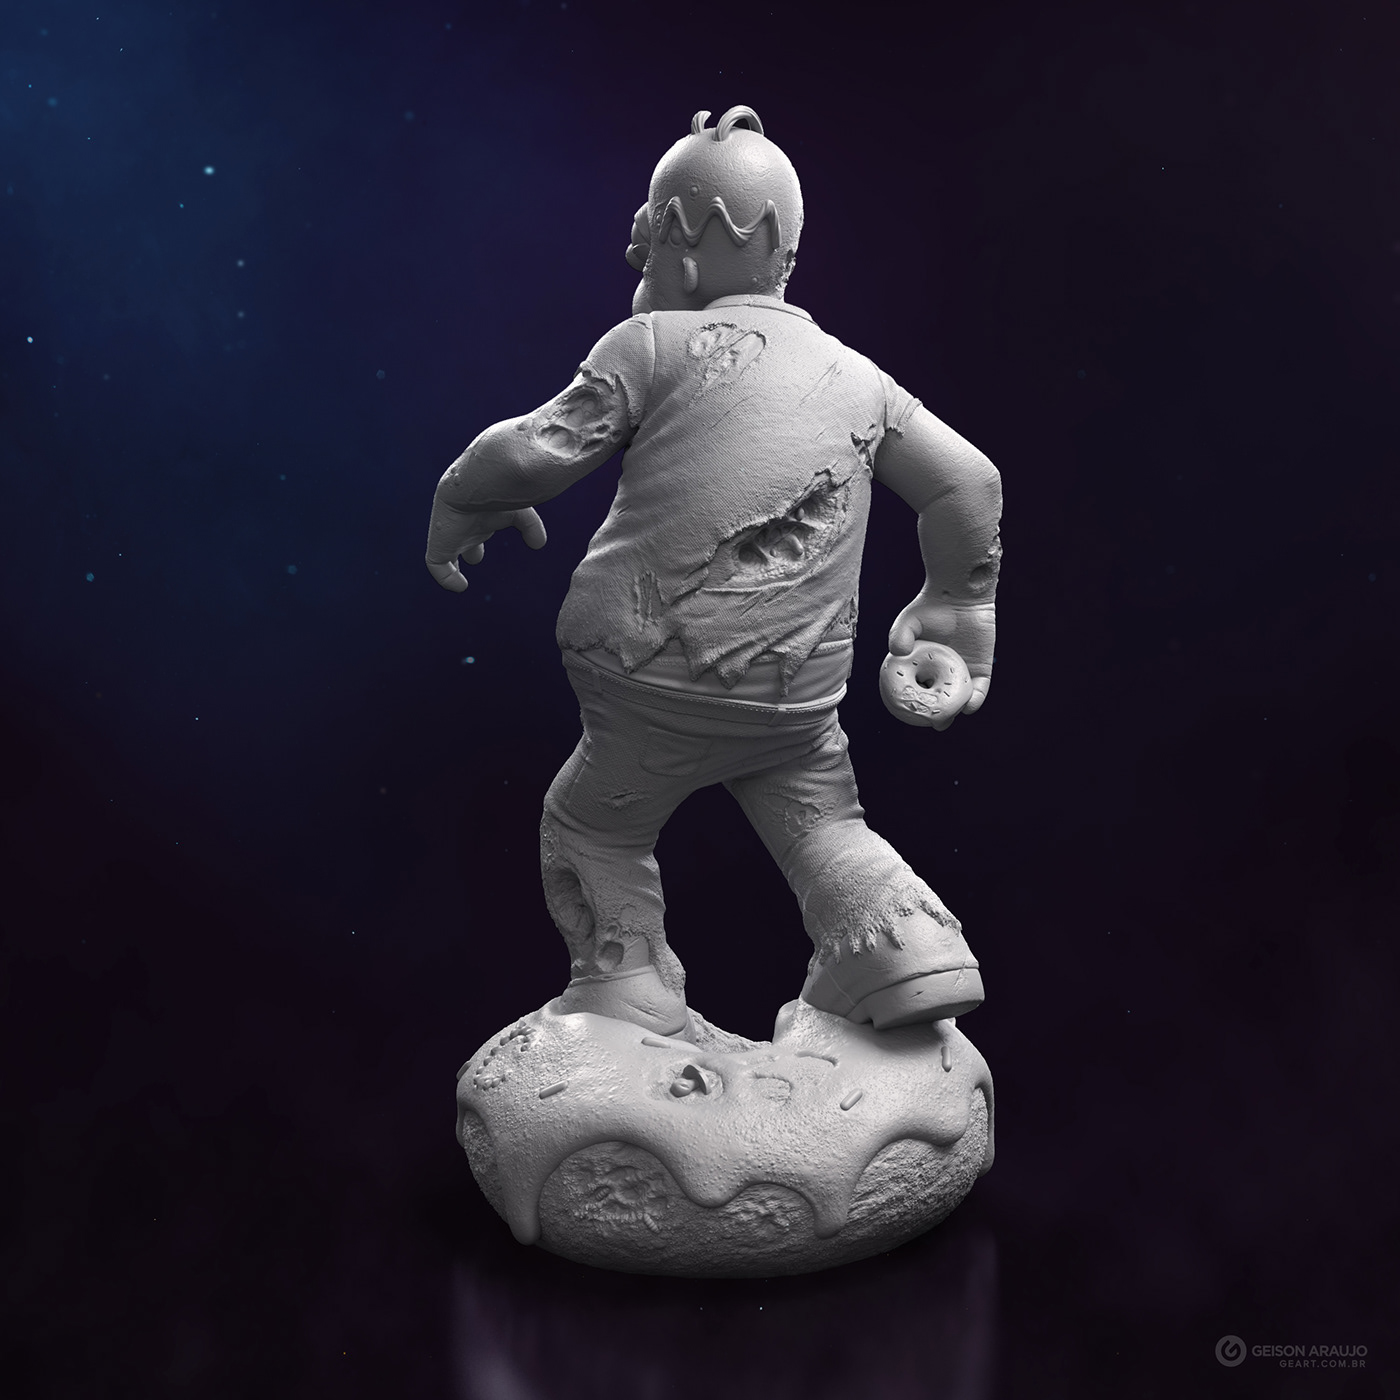 Homer simpsons zombie 3D collectible Zbrush figure fanart